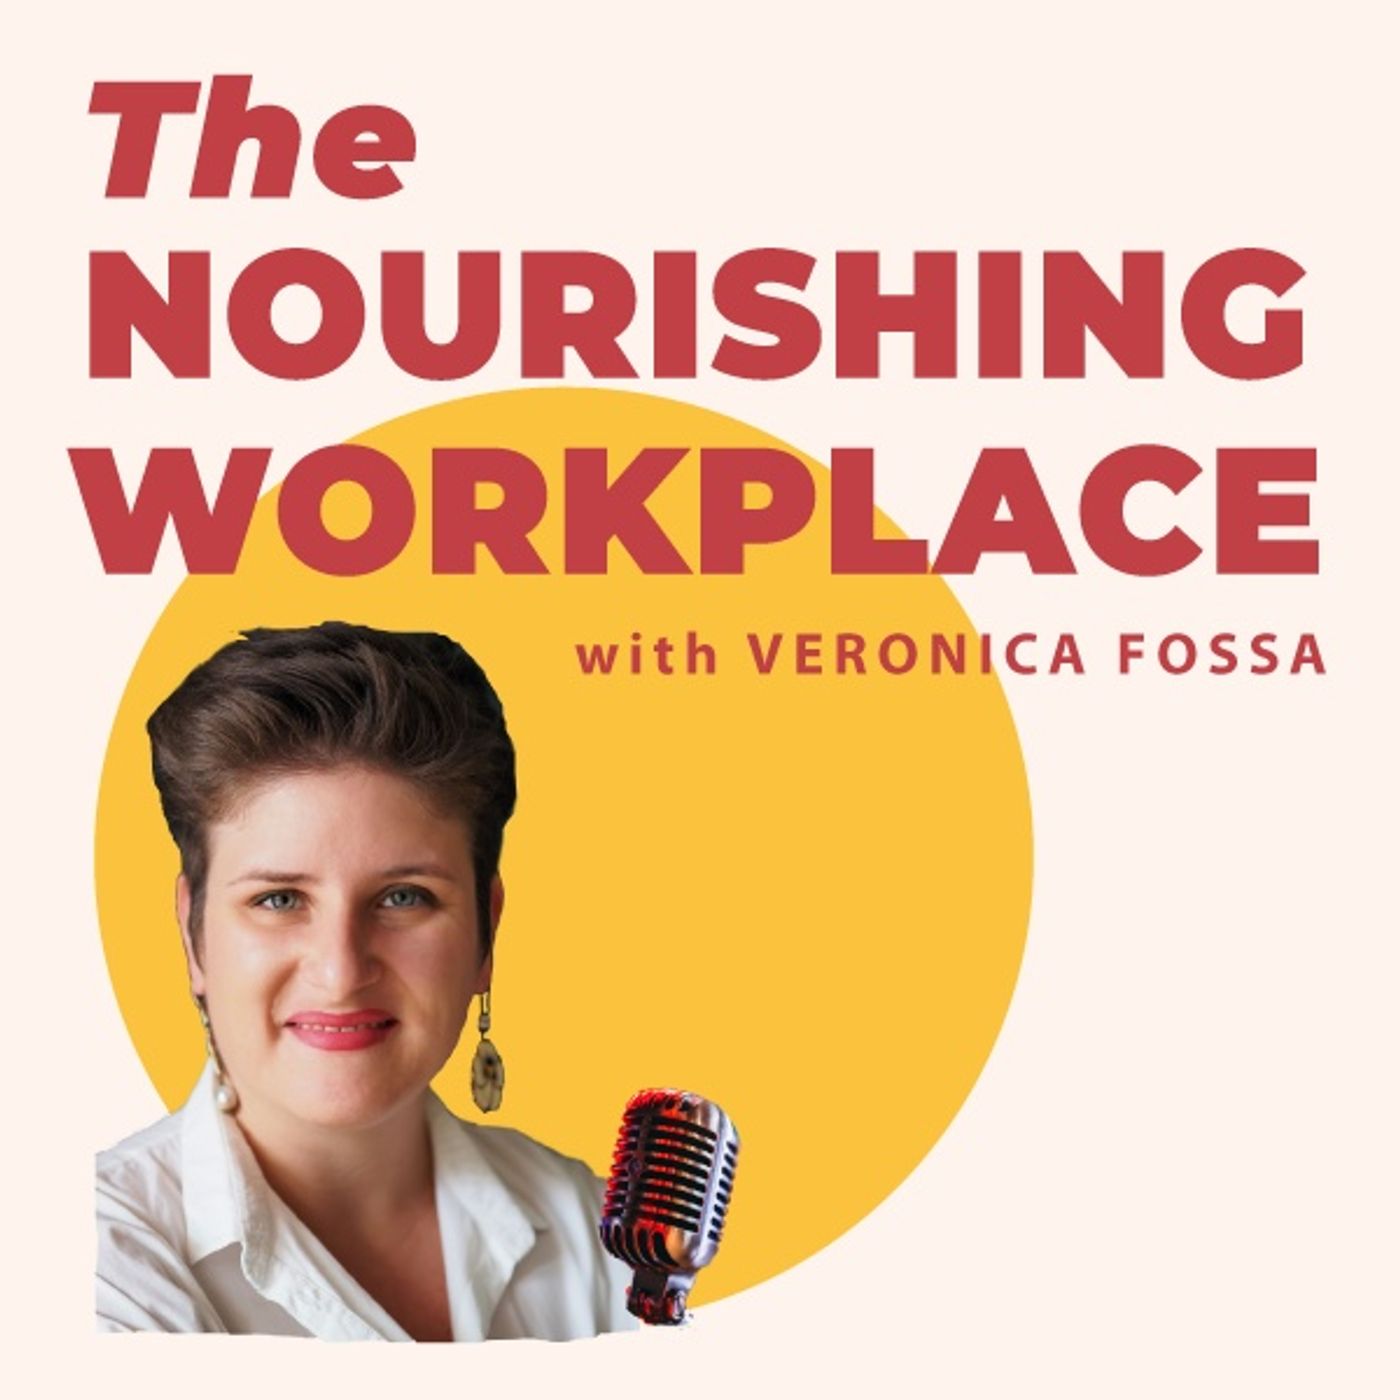 Introducing The Nourishing Workplace